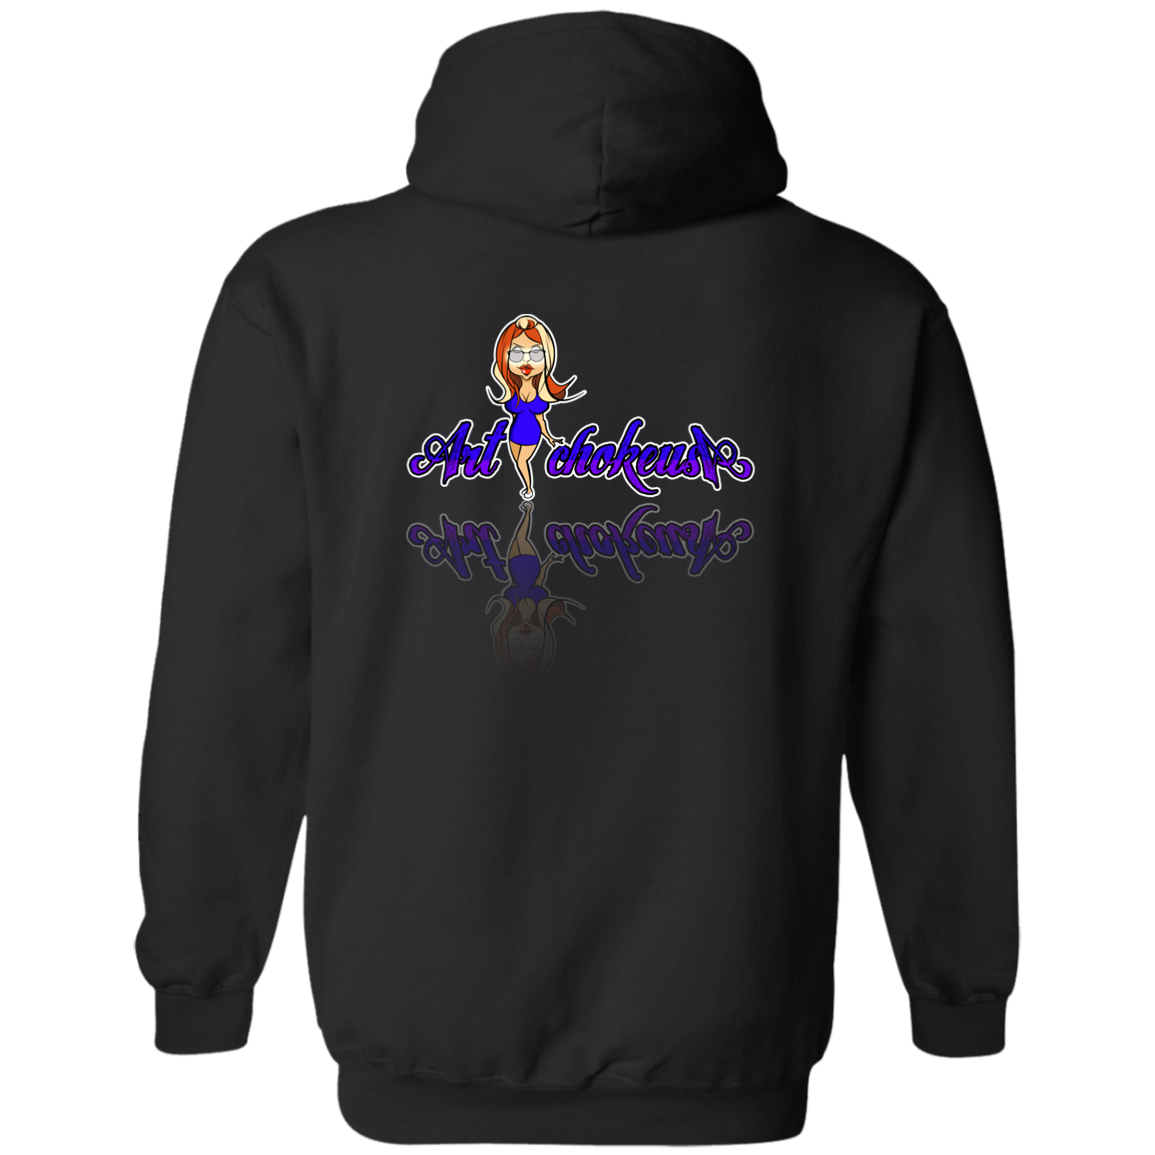 ArtichokeUSA Character and Font Design. Let’s Create Your Own Design Today. Blue Girl. Zip Up Hooded Sweatshirt